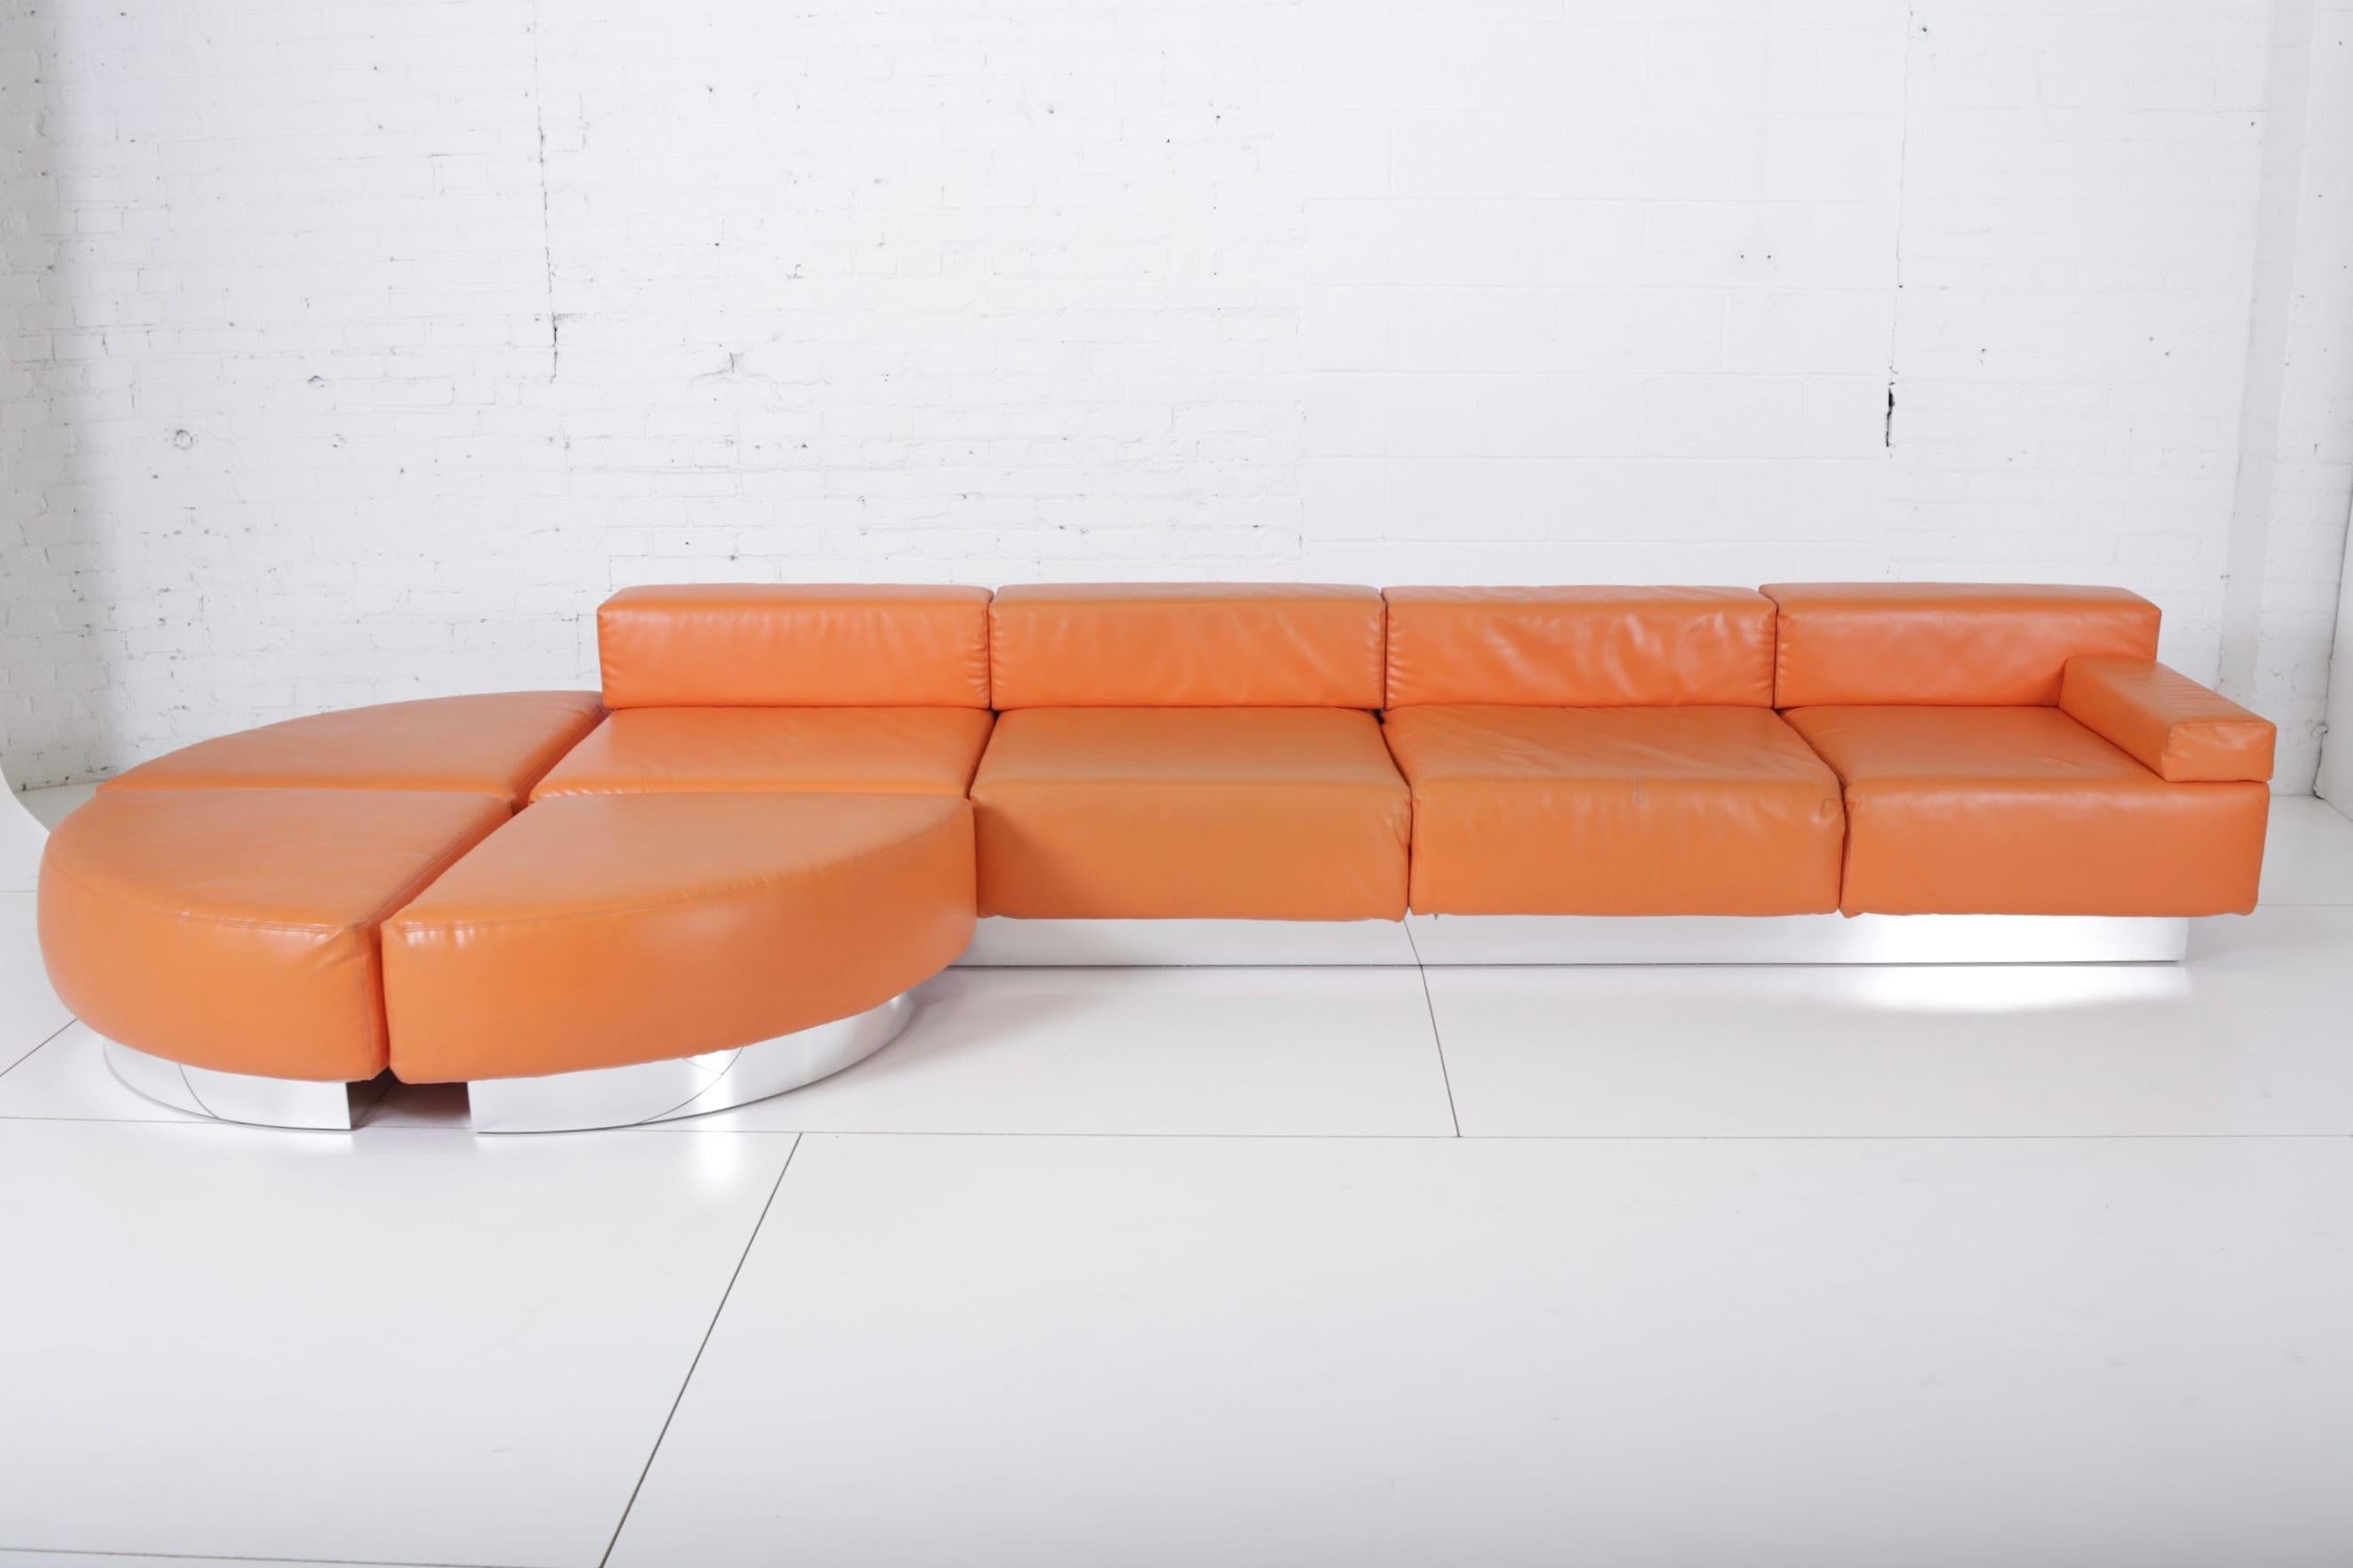 Cubo sofa by Harvey Probber. This large sofa consists of 4 seating sections that fit into 1 chrome base and 3 individual ottomans. Original vinyl shows wear.
 
 
    